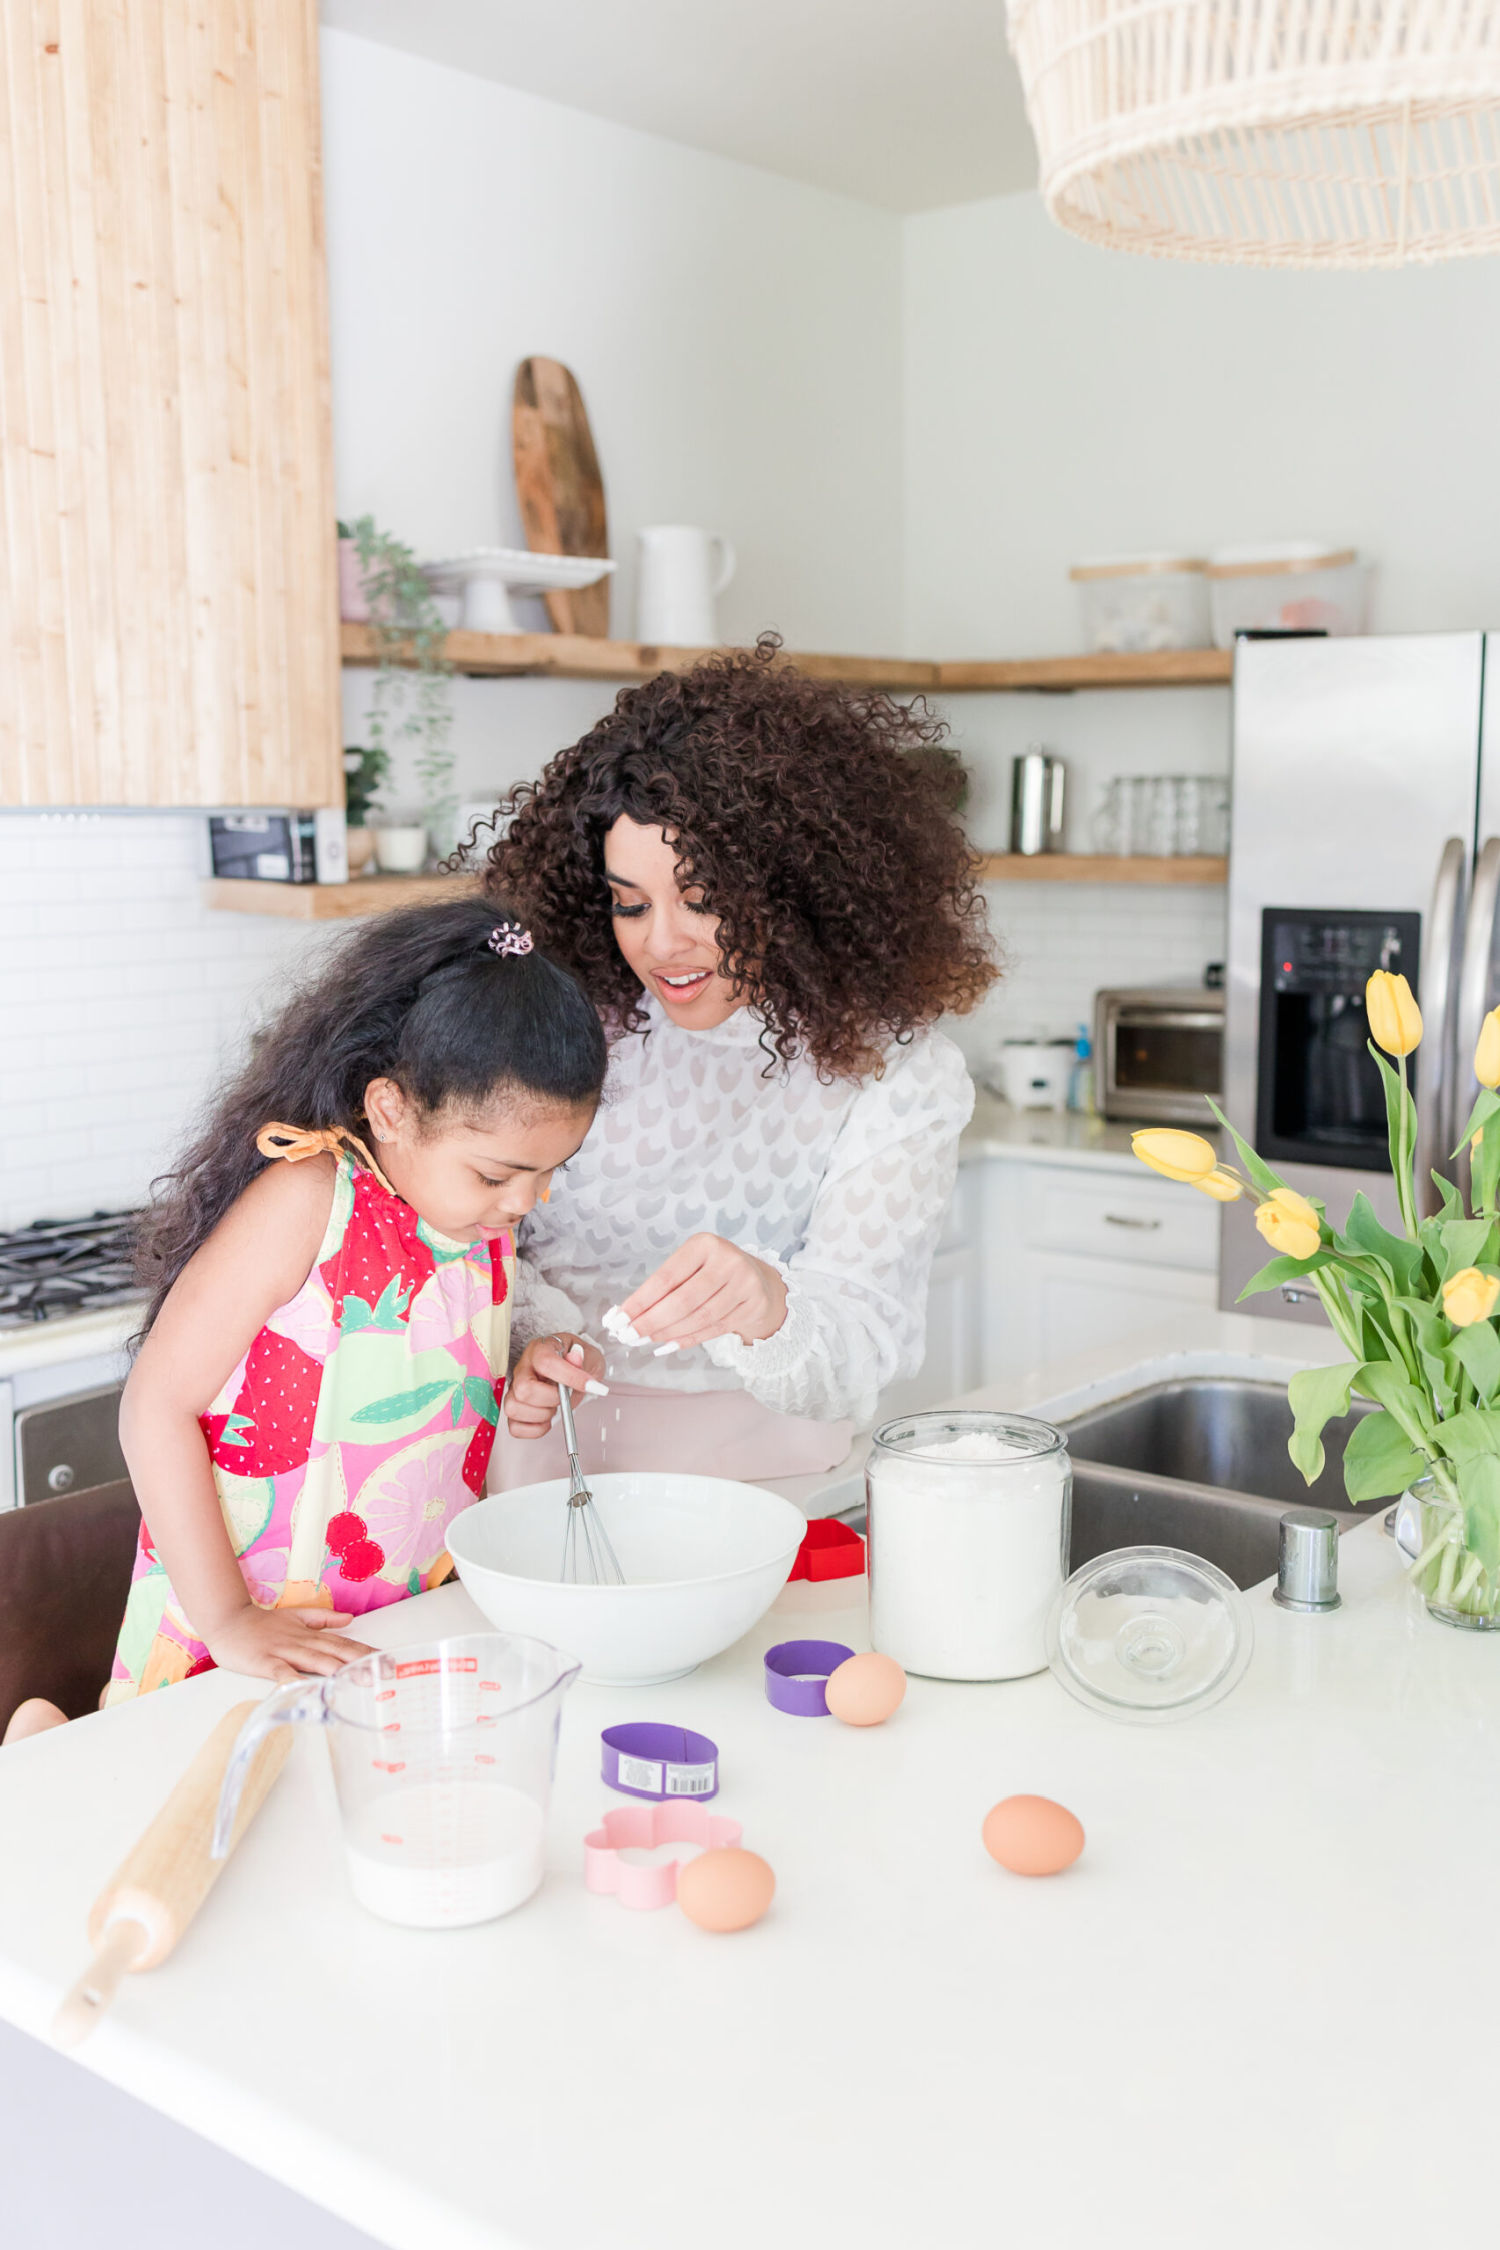 How You Can Create A Calm Environment At Home To Help Your Family Thrive